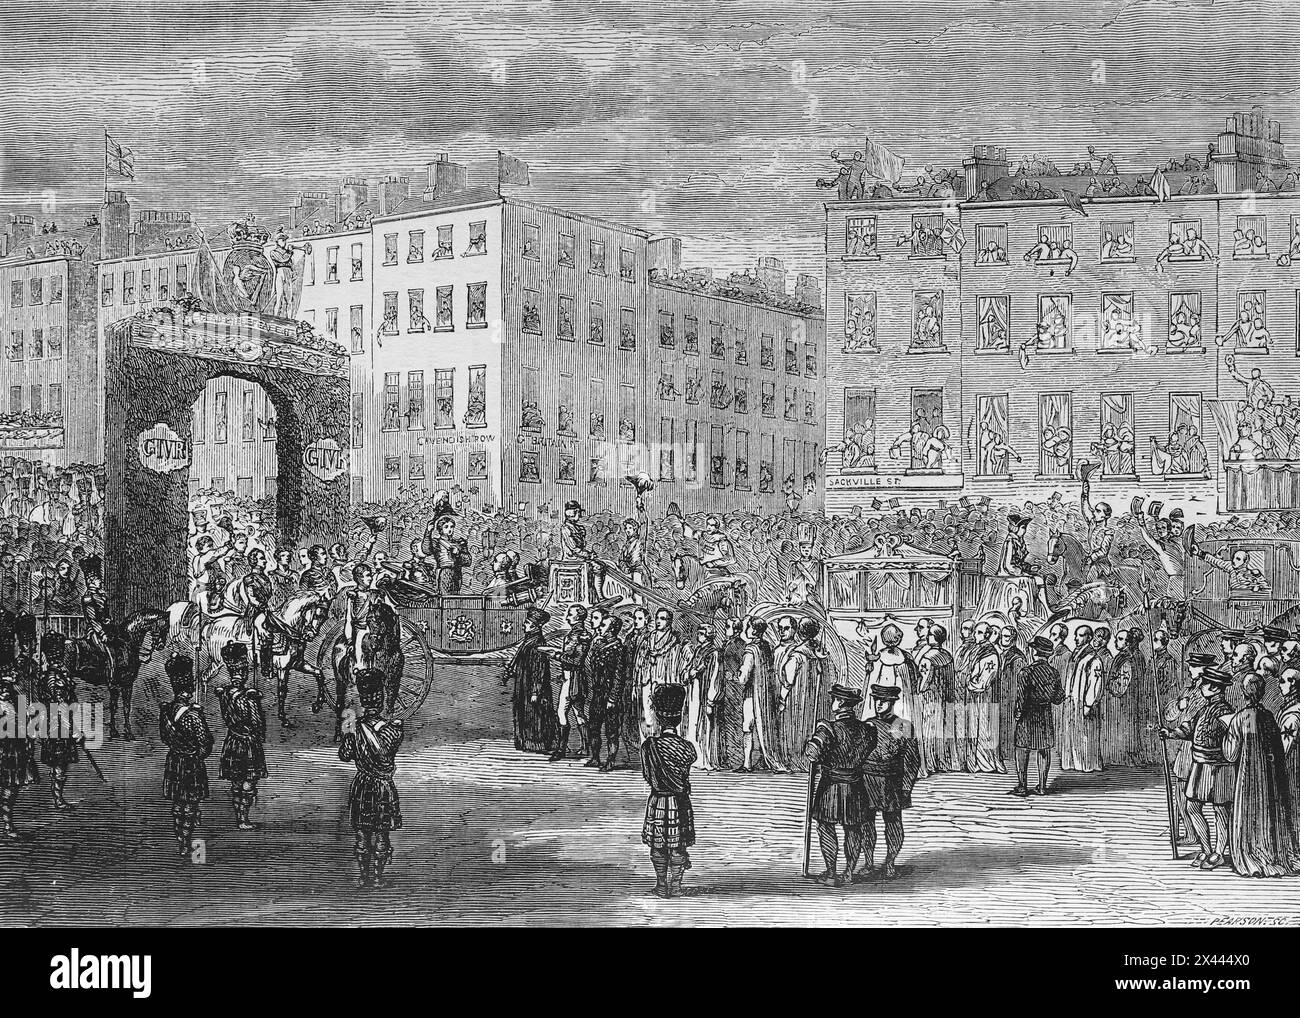 The entry of King George IV into Dublin 17 Aug 1821. This was King George's one and only visit to Ireland. Illustration from Cassell's History of England, Vol VII. New Edition published Circa 1873-5. Stock Photo